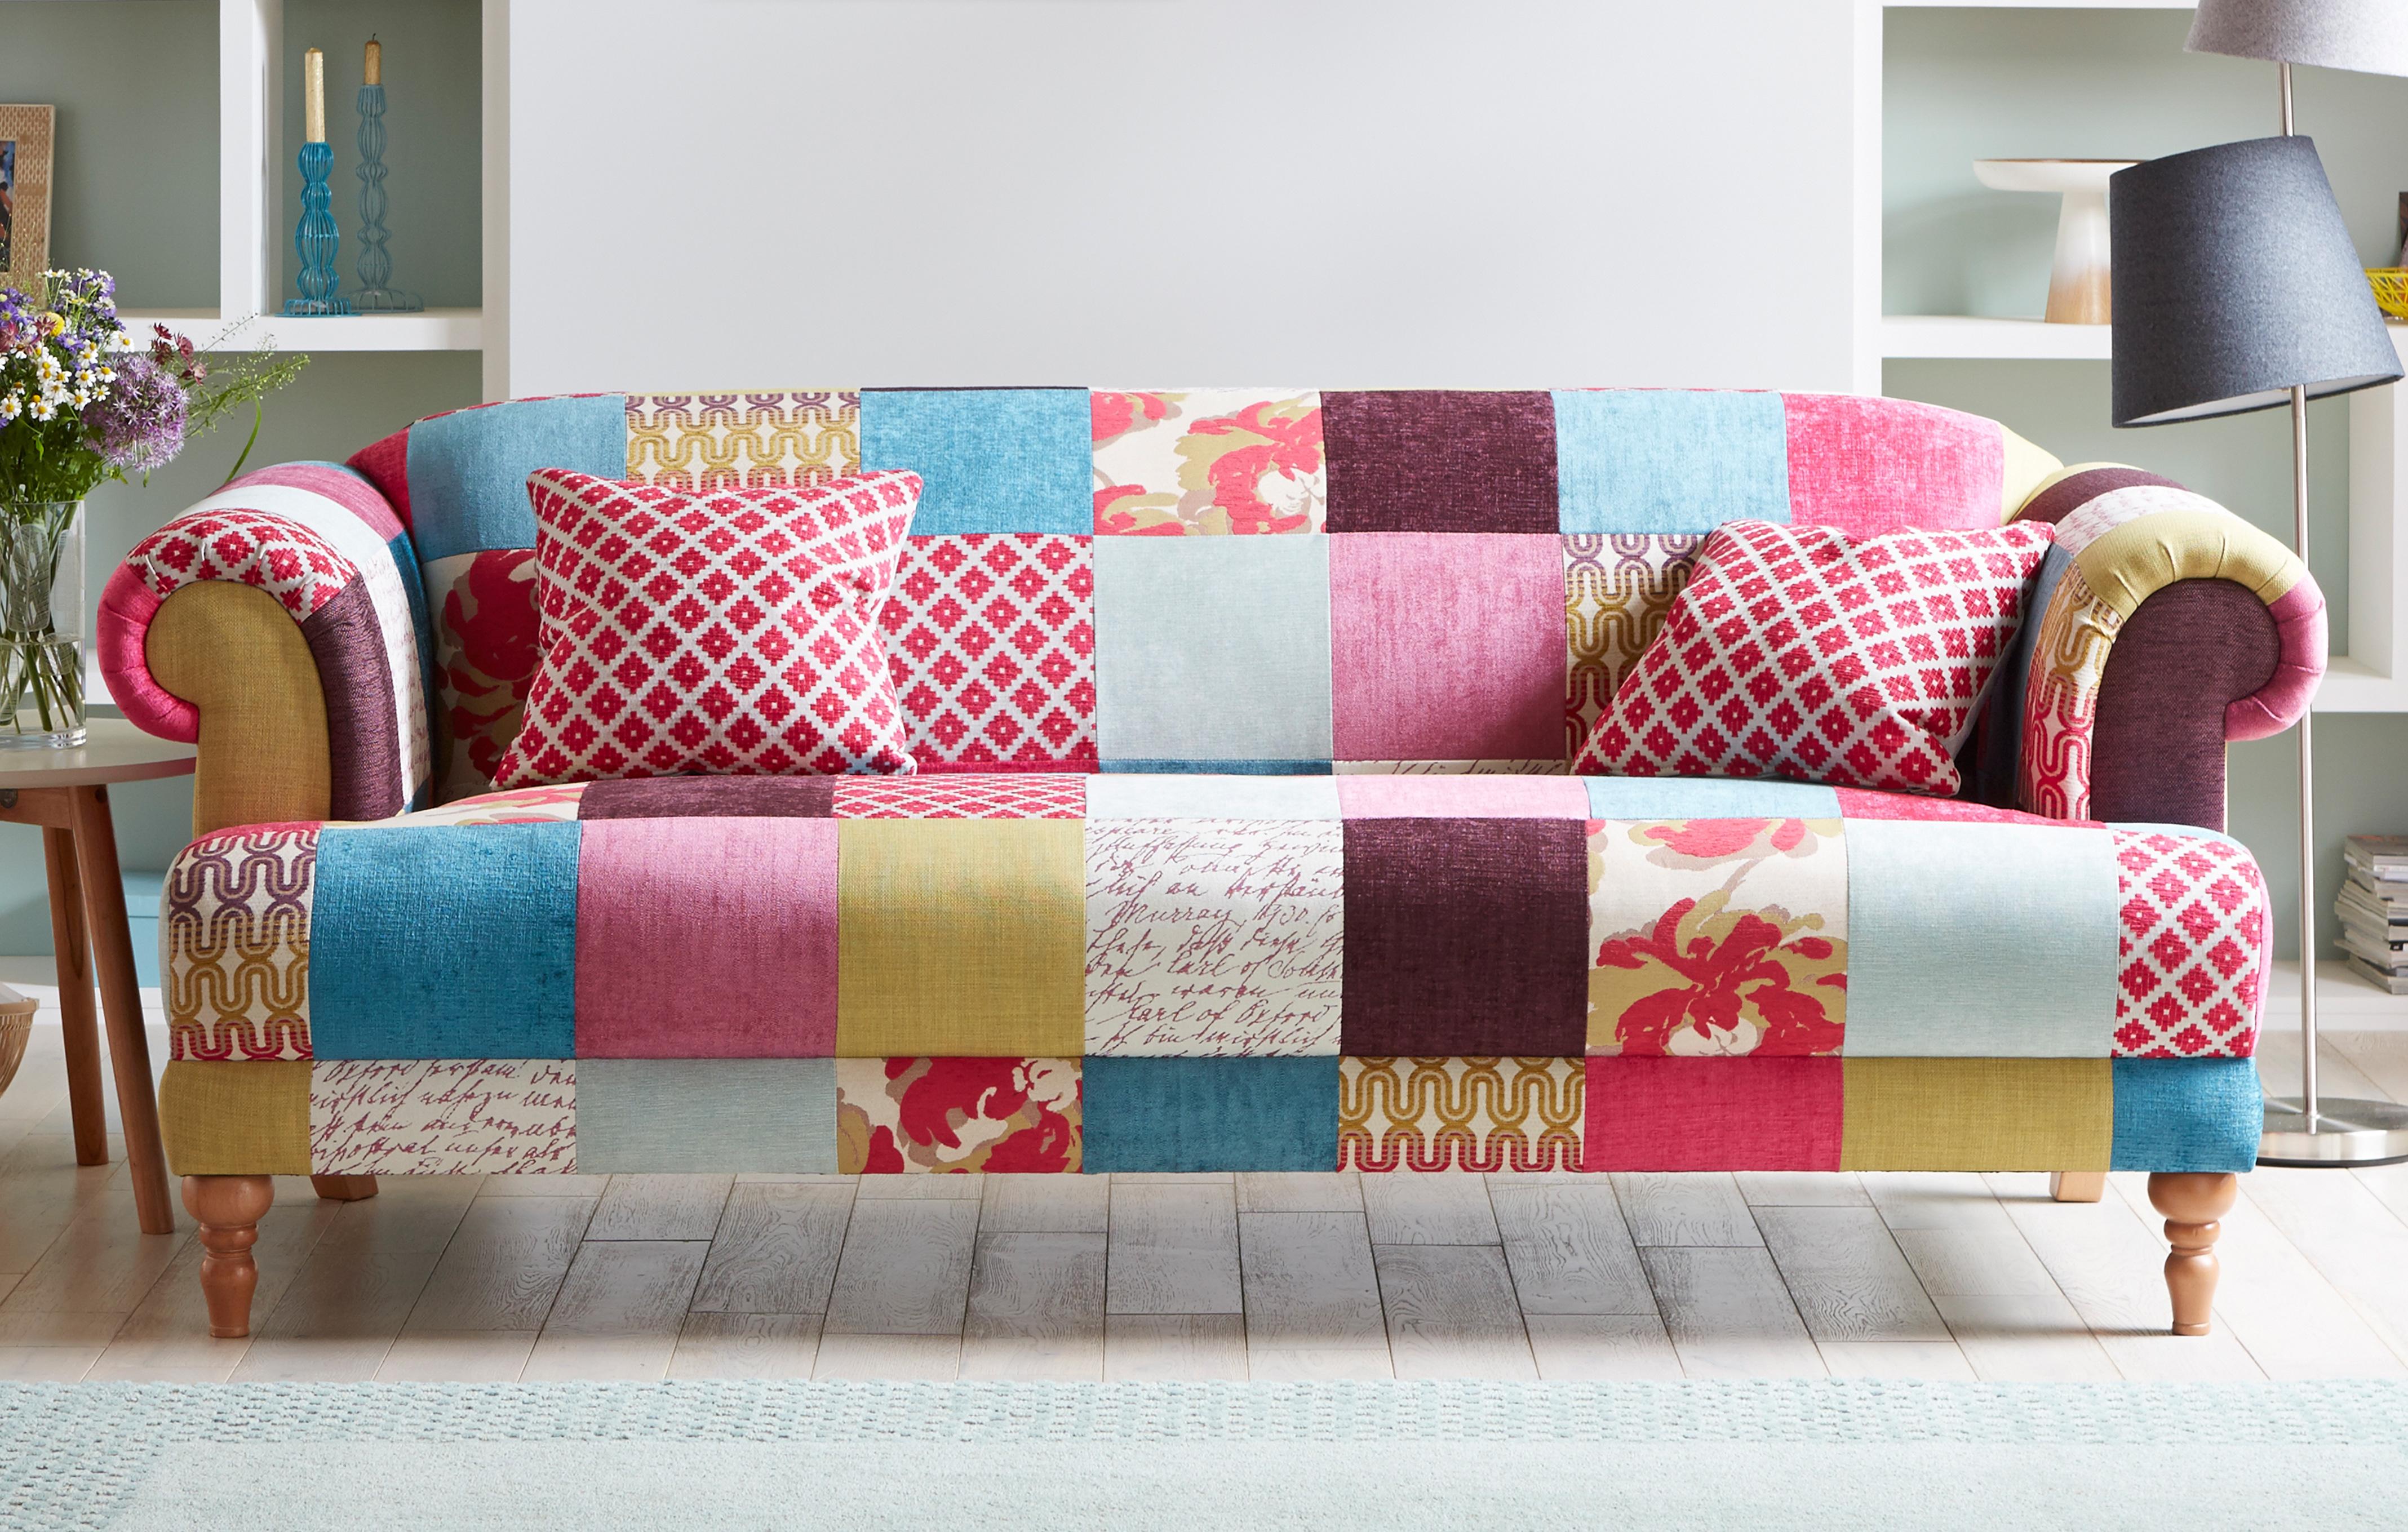 See our full range of quality fabric sofas | DFS Ireland